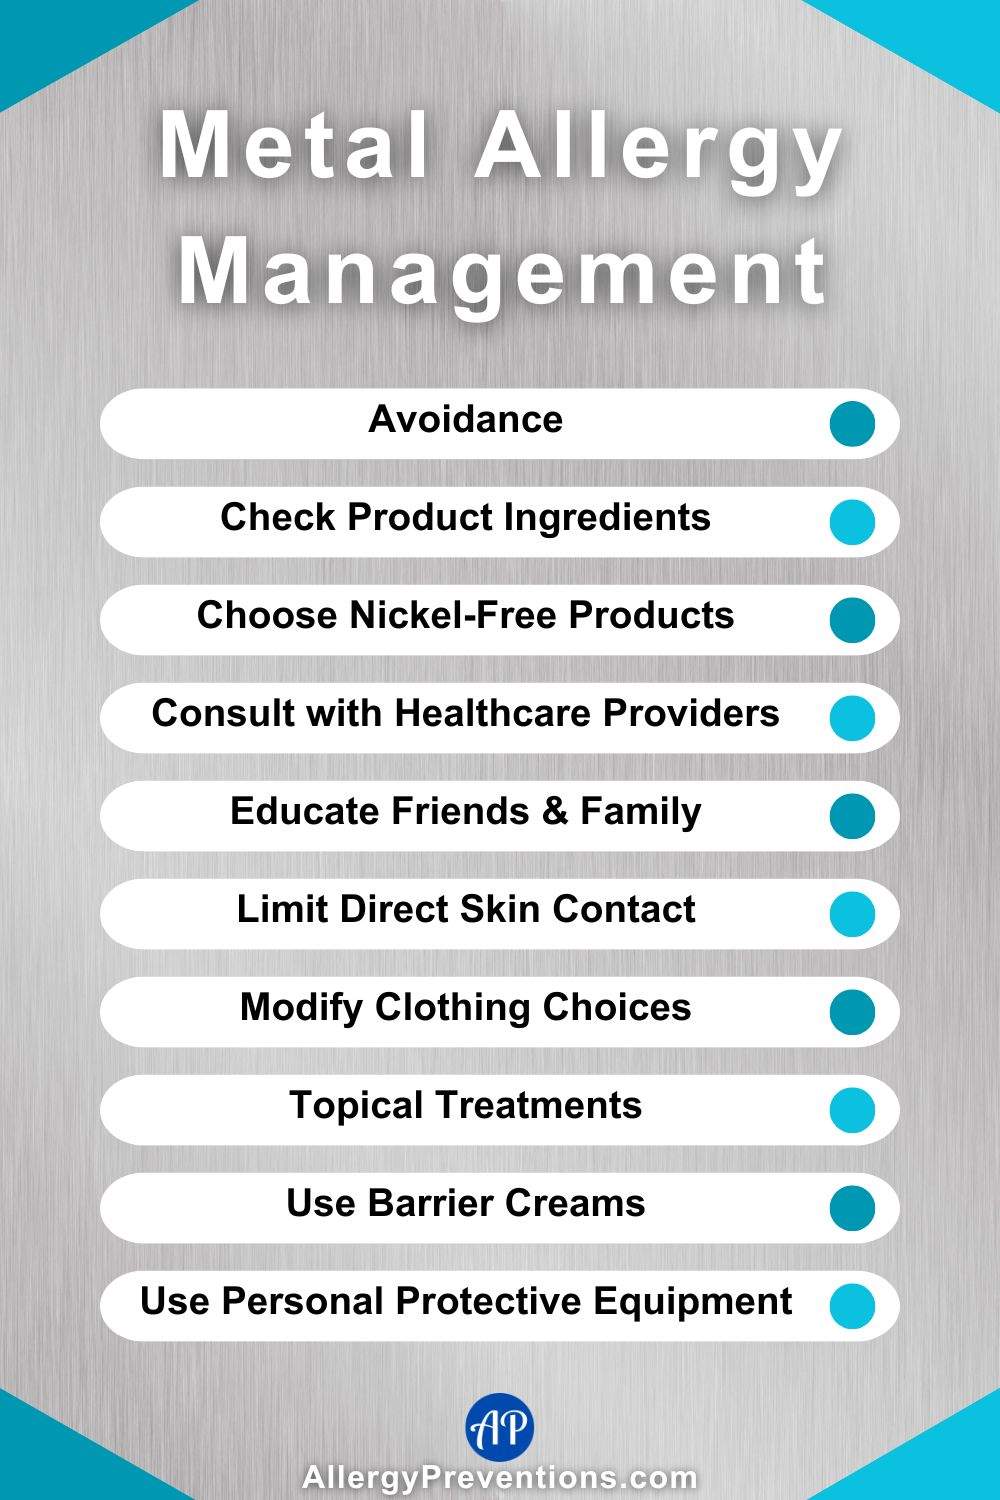 Metal Allergy Management Infographic. List of ways to manage a metal allergy: Avoidance, Choose Nickel-Free, Products, Consult with Healthcare Providers, Educate Friends & Family, Limit Direct Skin Contact, Modify Clothing Choices, Topical Treatments, Use Barrier Creams, Check Product Ingredients, and Use Personal Protective Equipment.